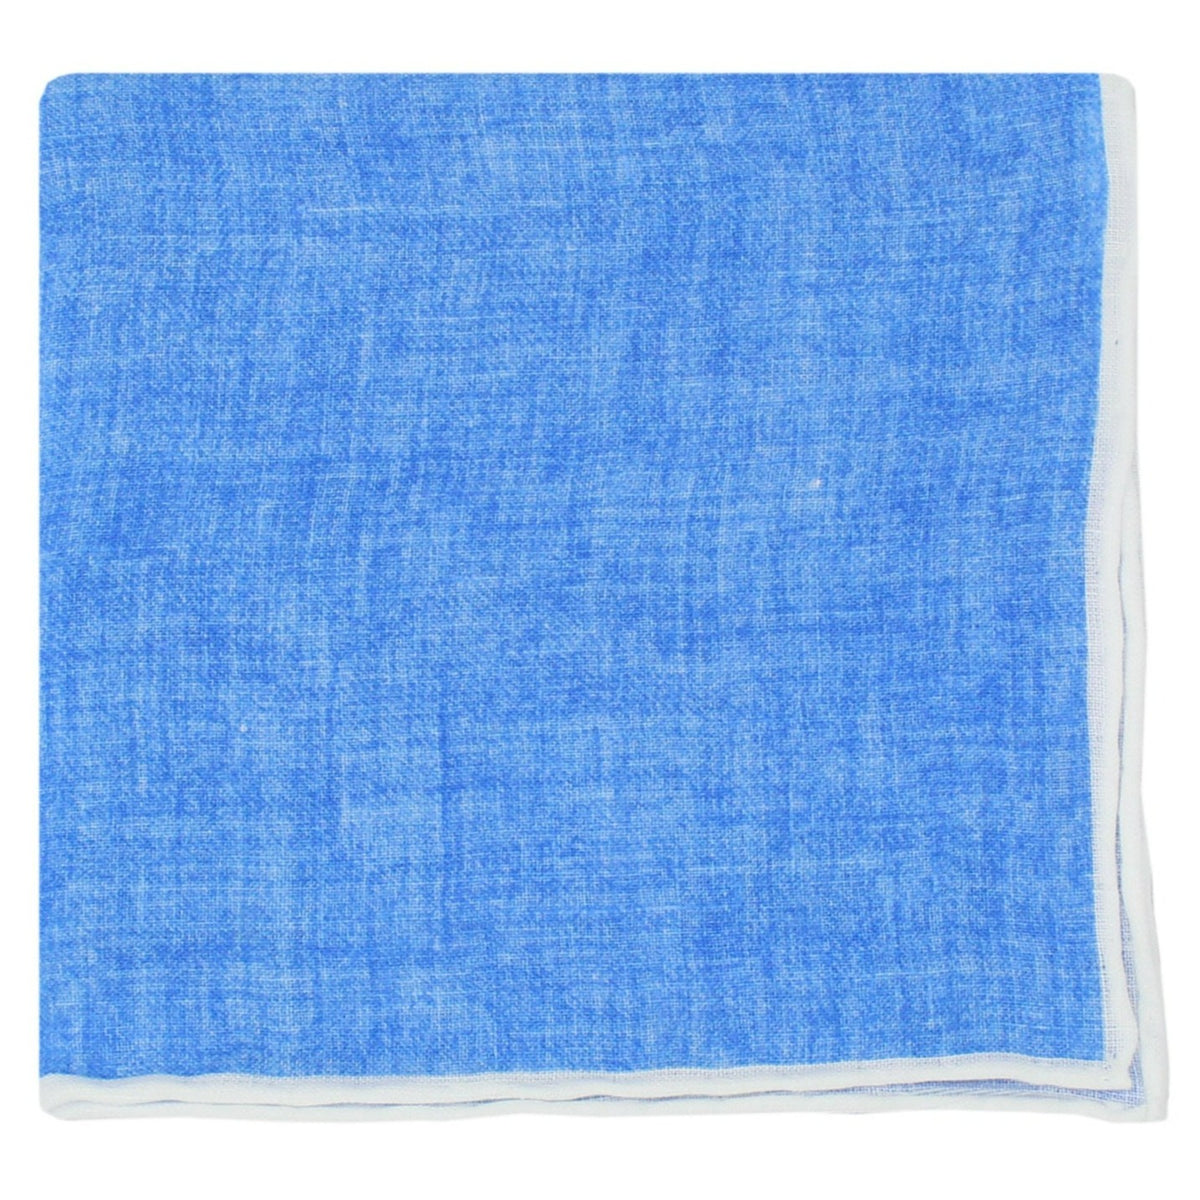 Linen pocket square with light blue background and white border